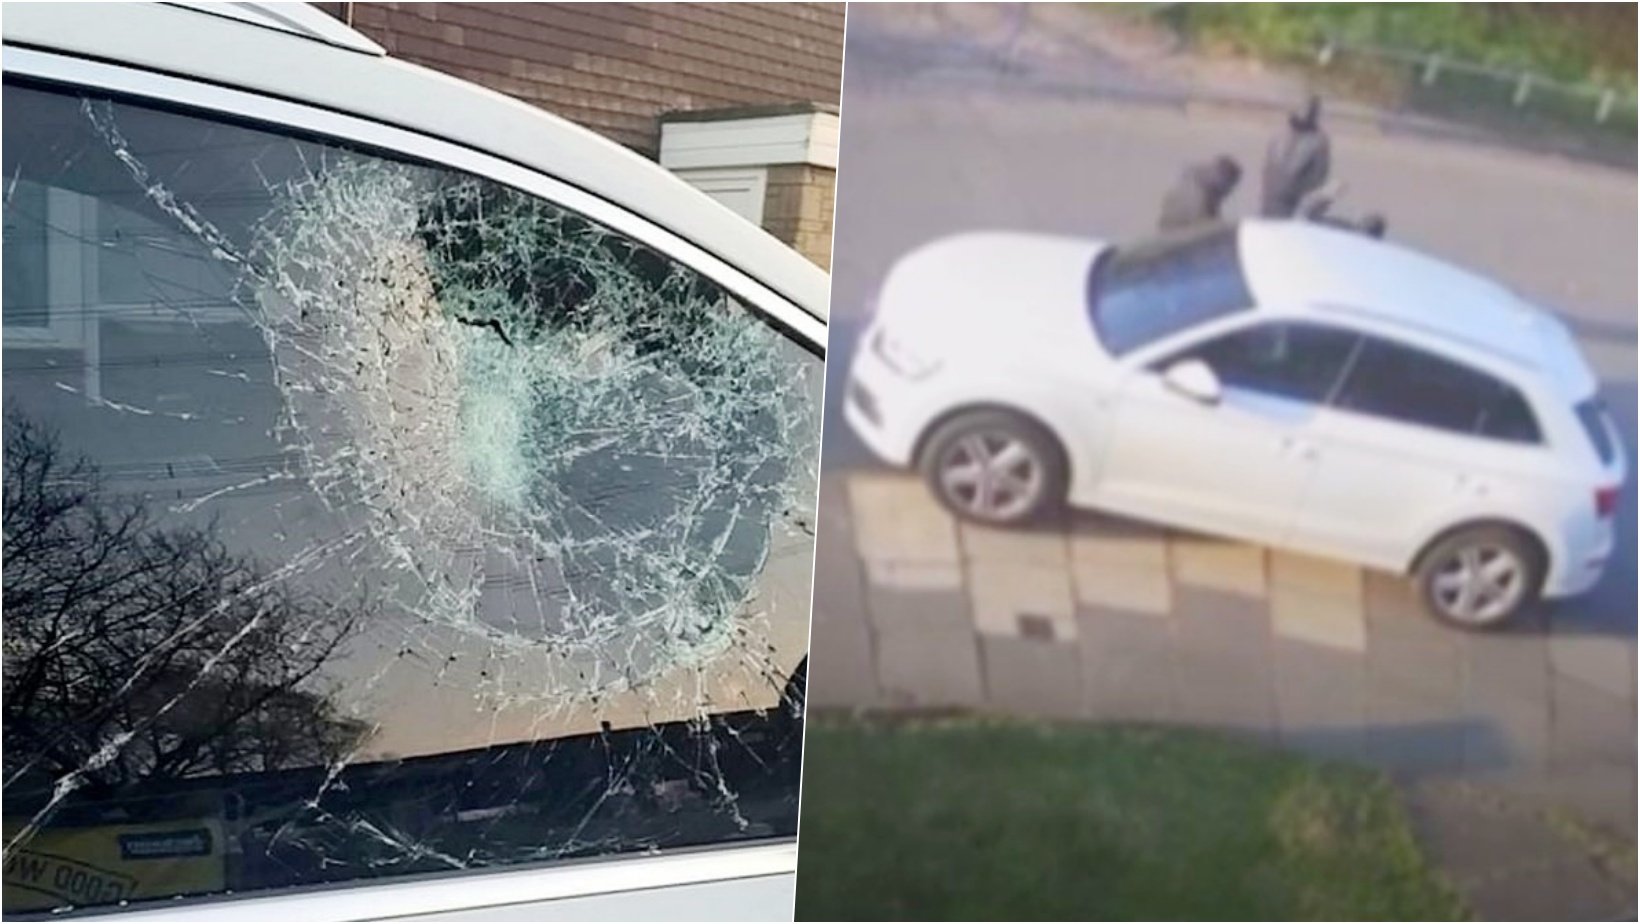 6 facebook cover 5.jpg?resize=412,232 - 7-Year-Old Boy Screams “Drive Mom, Drive” After Carjack Masked Thugs With Machete Smashed Car’s Window